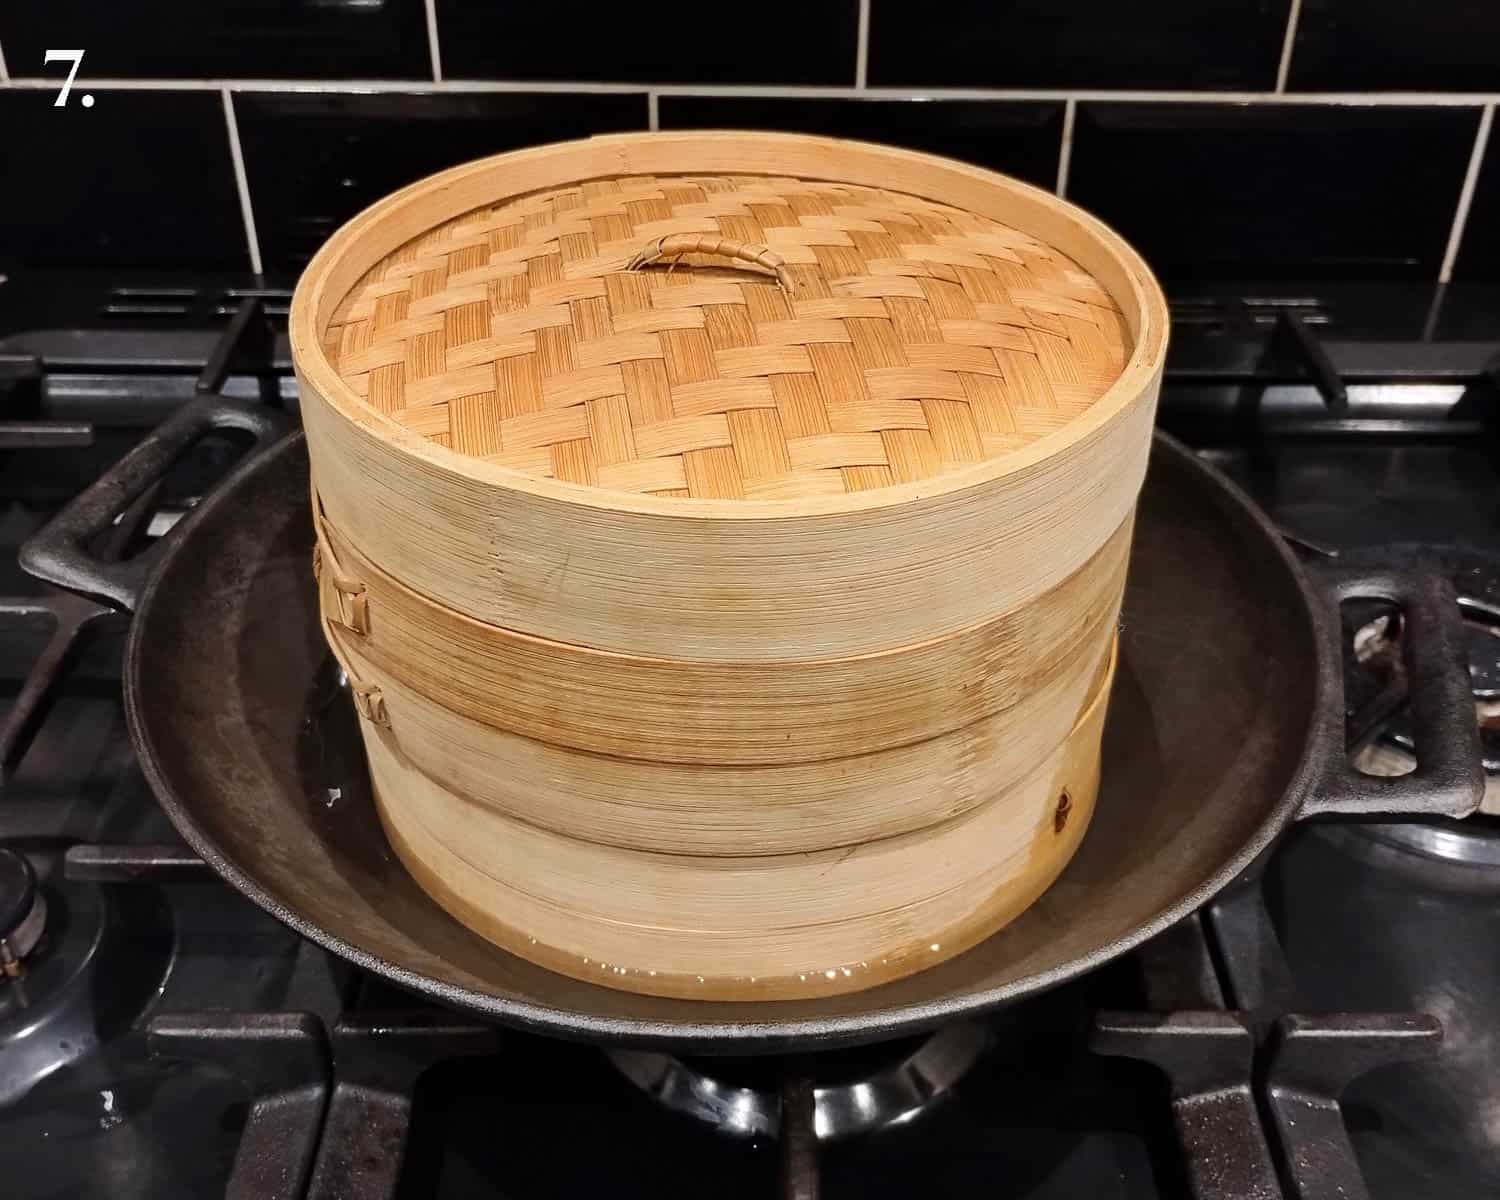 Step 7, the bamboo steamer in a wok.